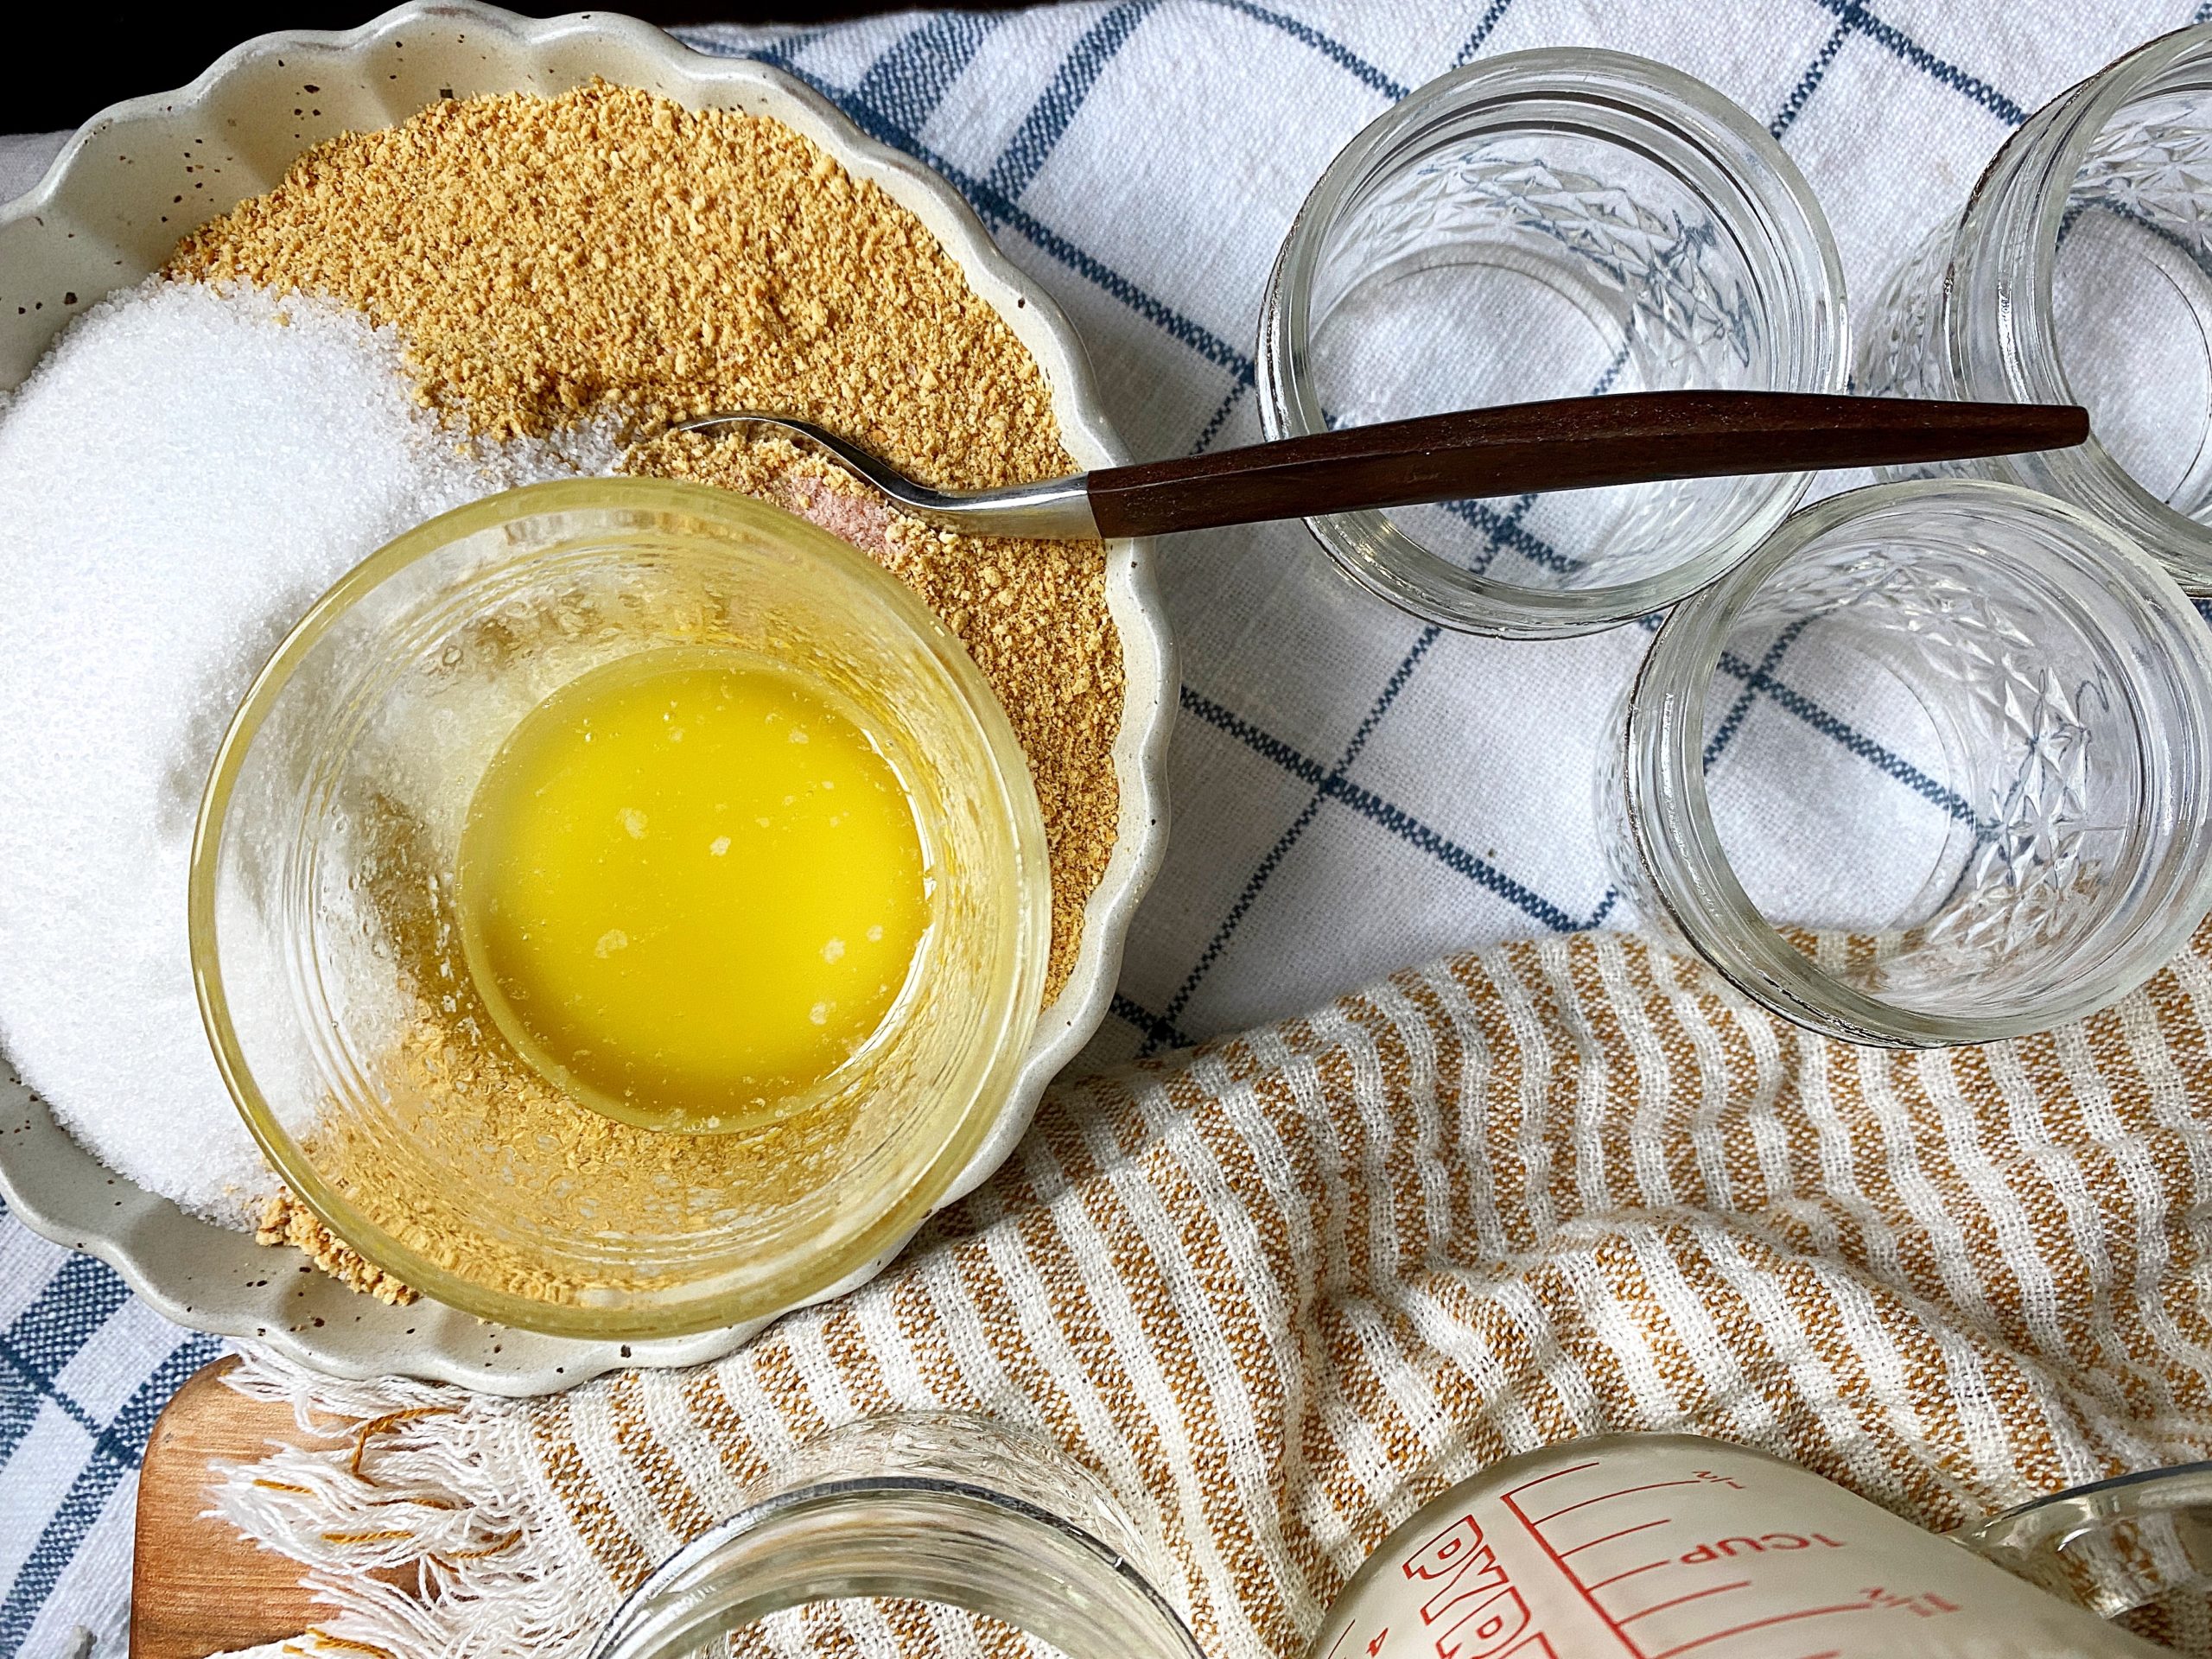 melted butter + crust ingredients and jars